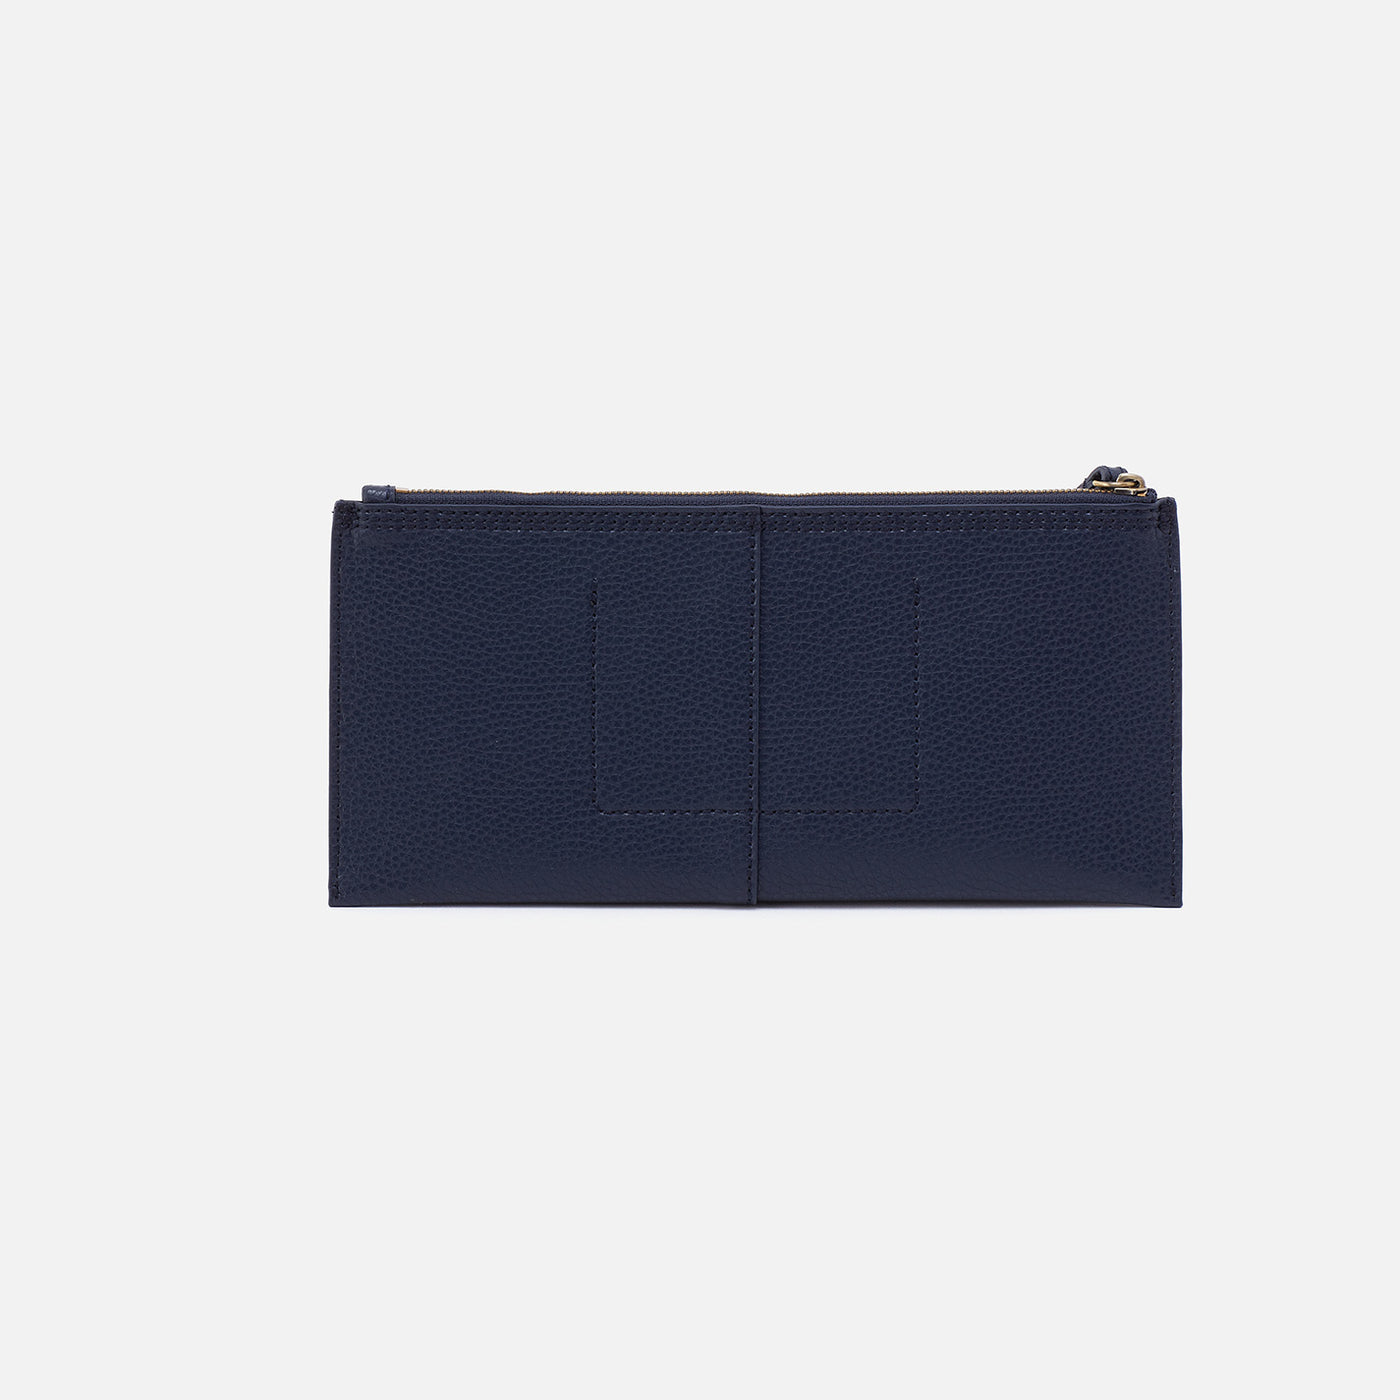 Vida Large Pouch in Micro Pebbled Leather - Mood Indigo